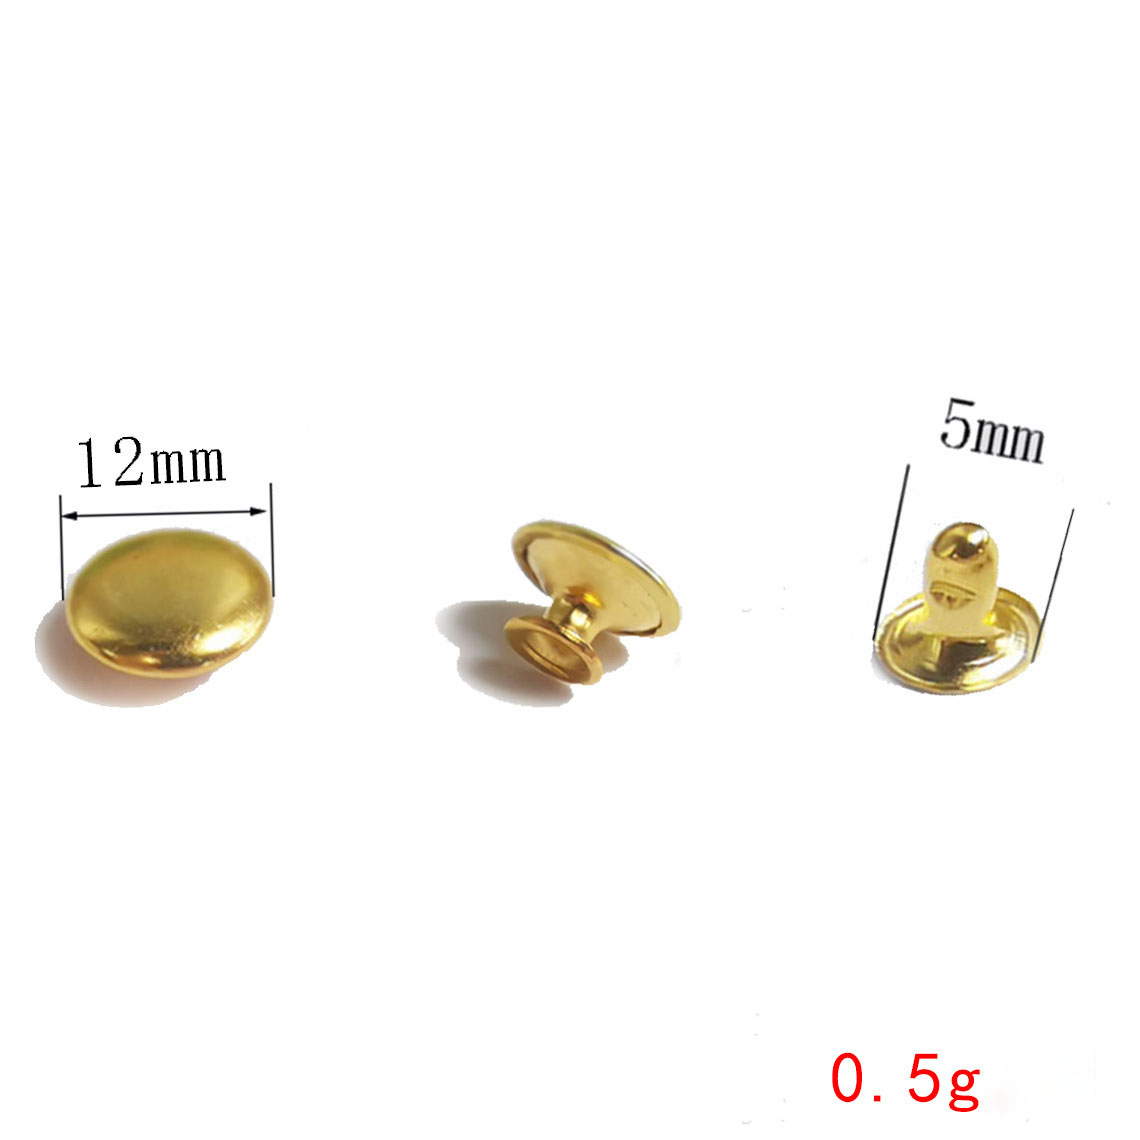 12mm gold